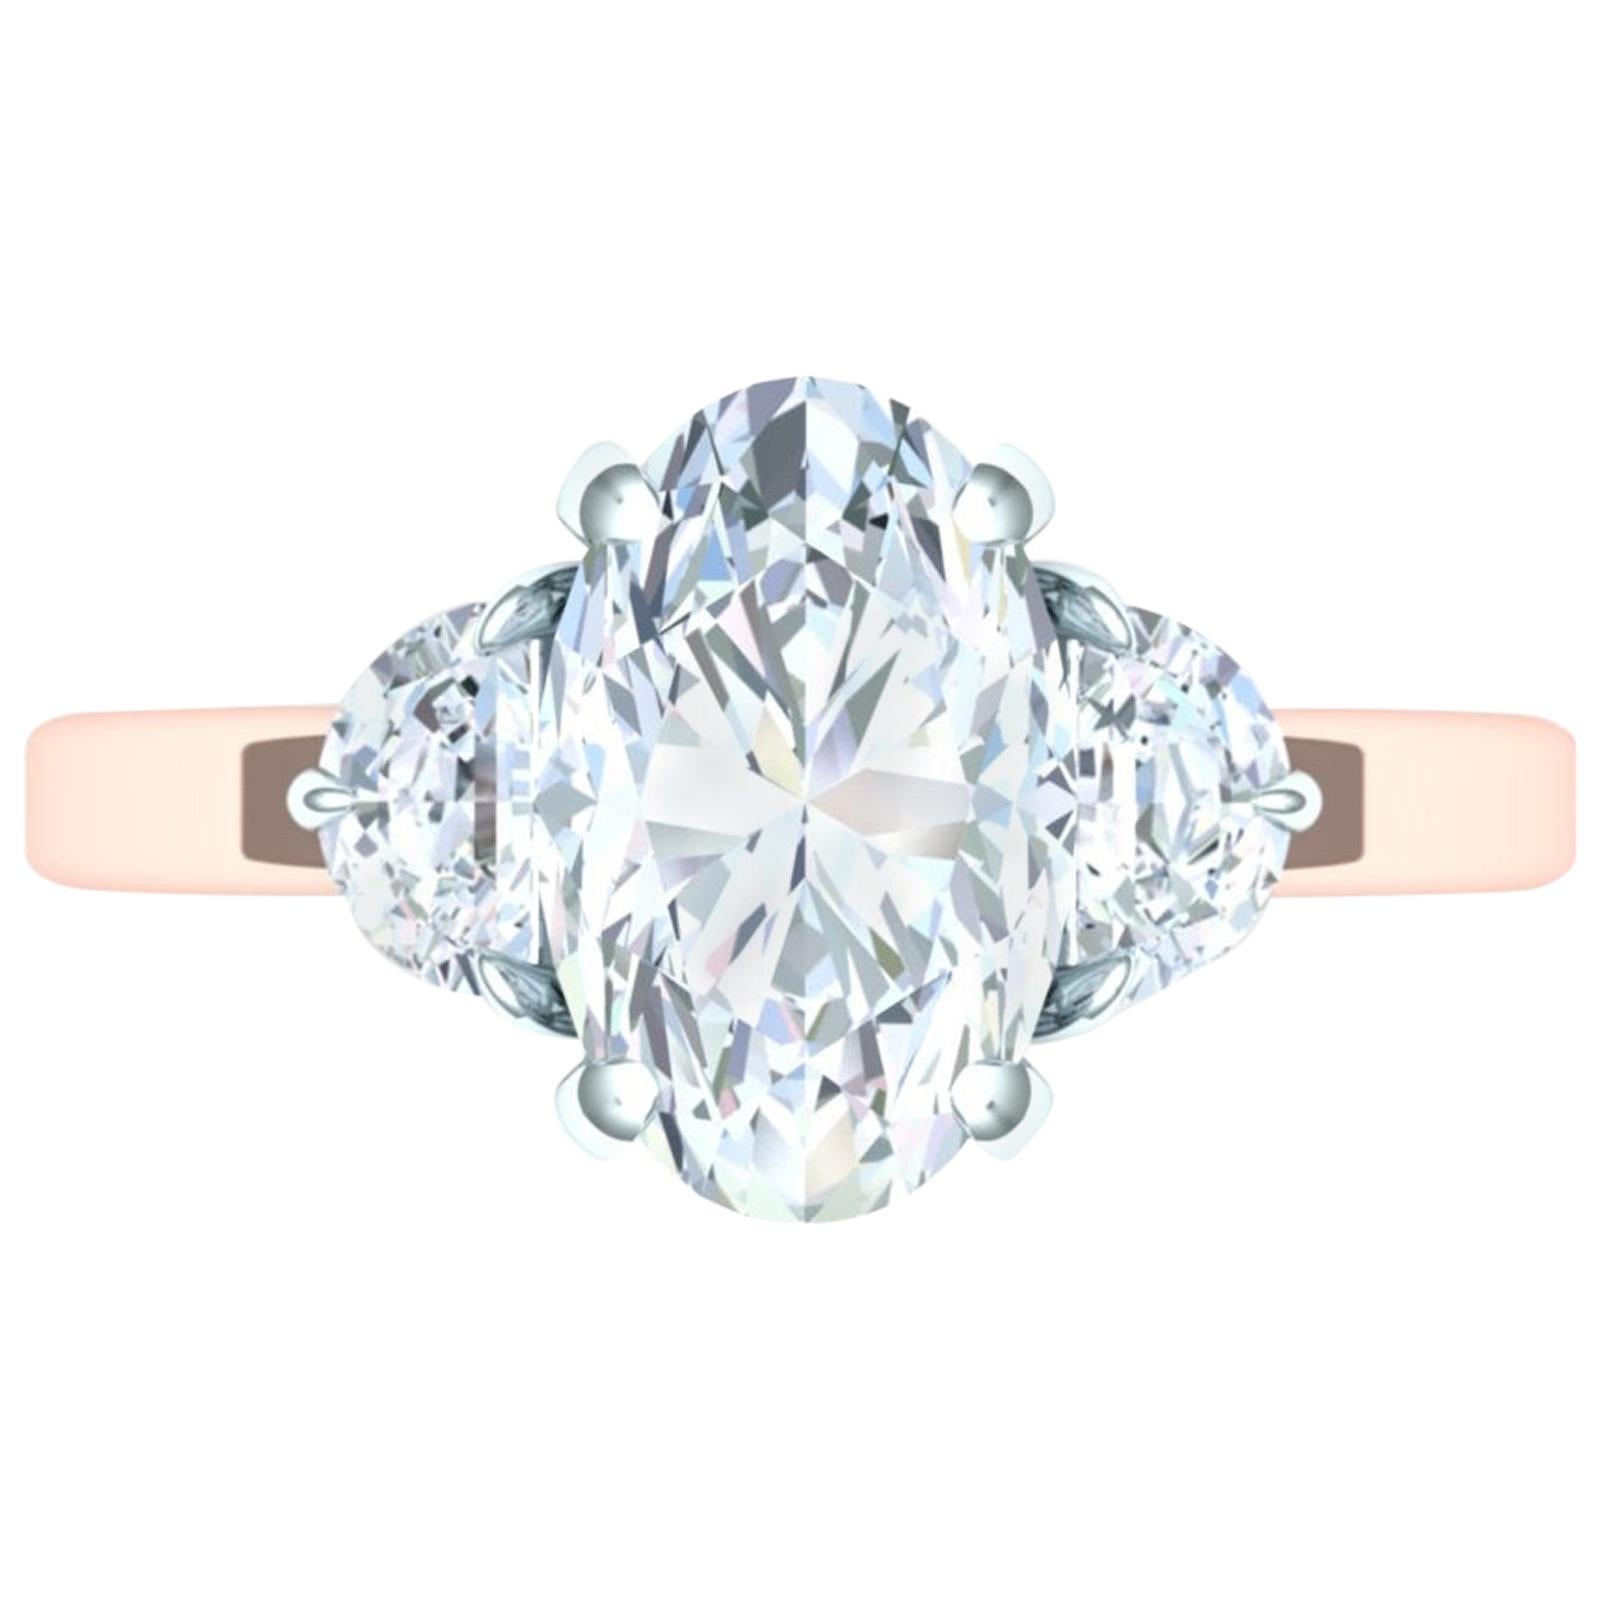 2.5 Carat GIA Certified Oval Diamond H-SI2 Three-Stone Engagement Ring